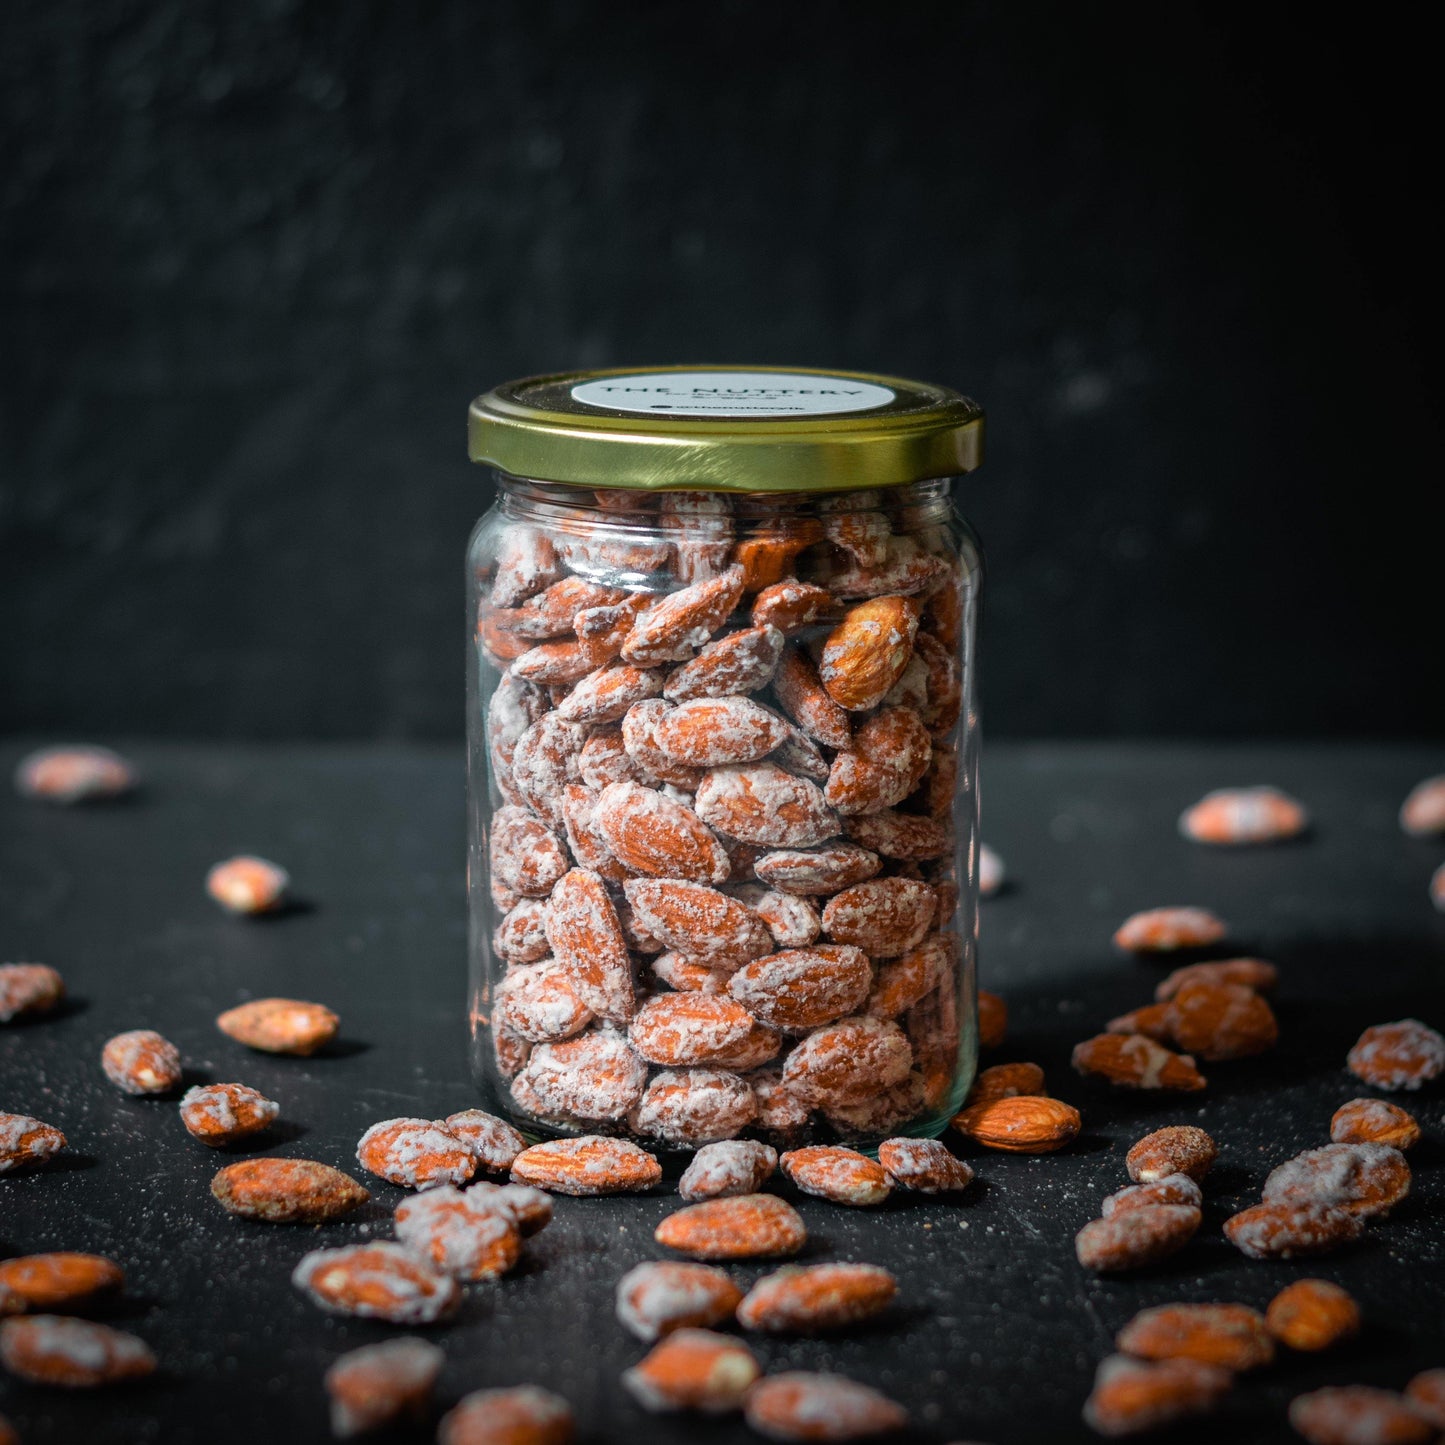 Candied Almonds (Sugar coated) - The Nuttery